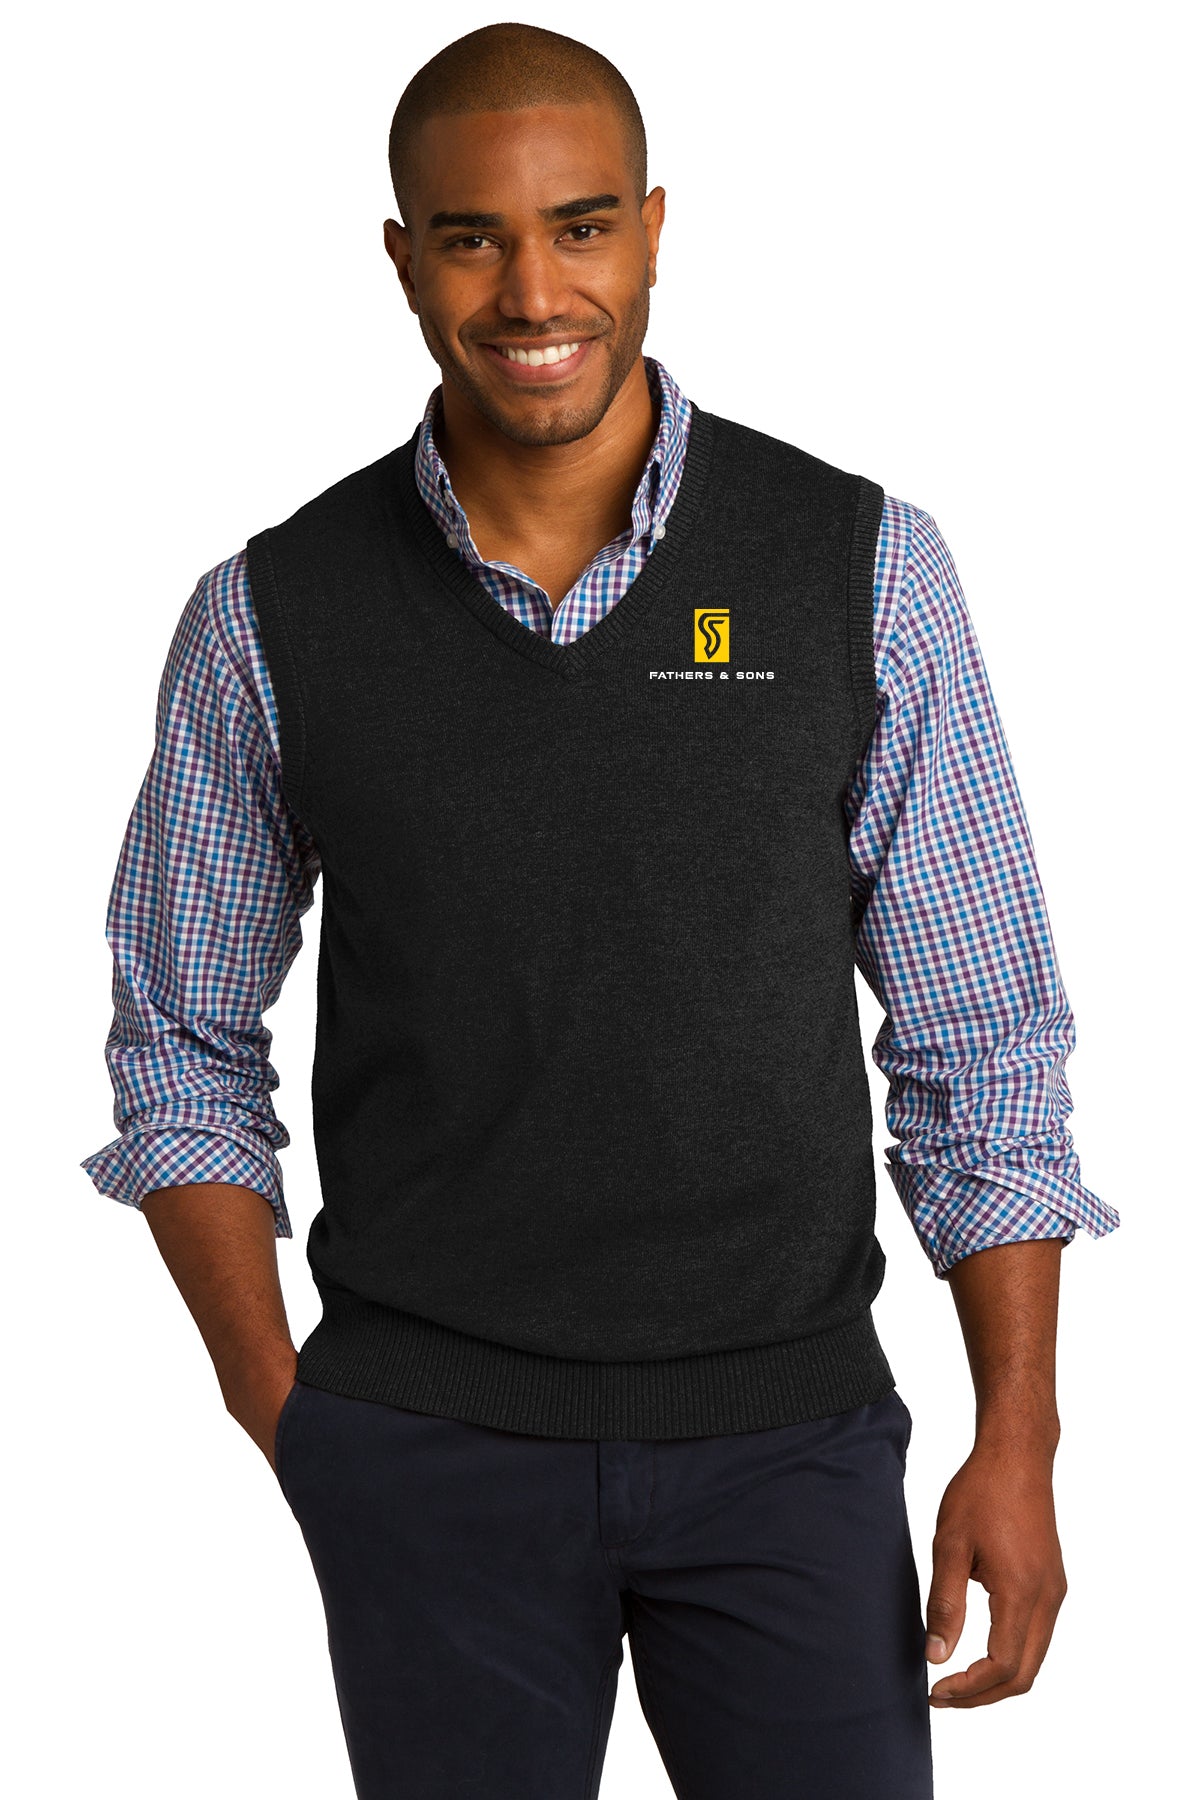 Fathers and Sons Sweater Vest